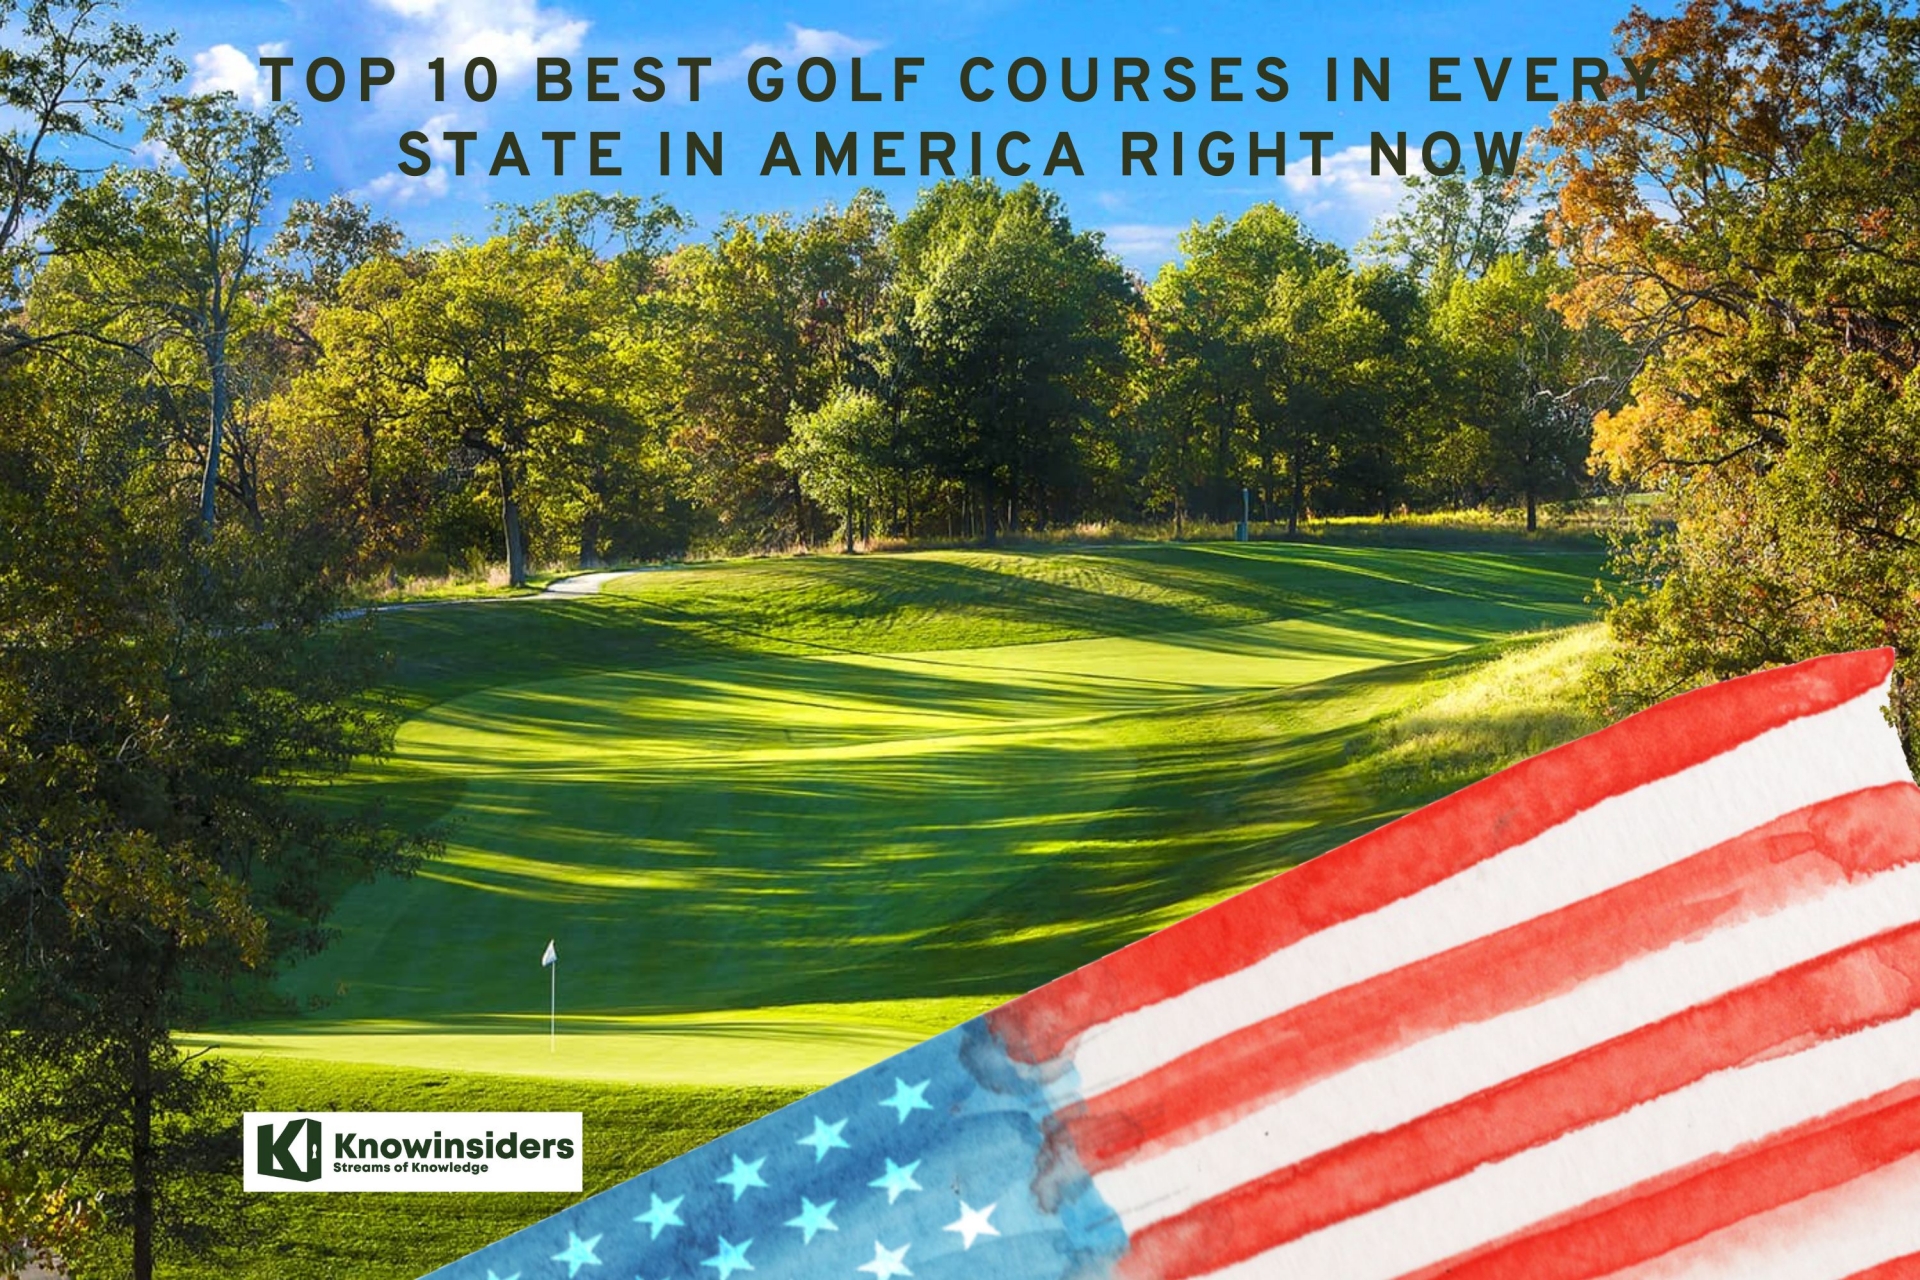 Top 10 Best Golf Courses for Every State in America Right Now